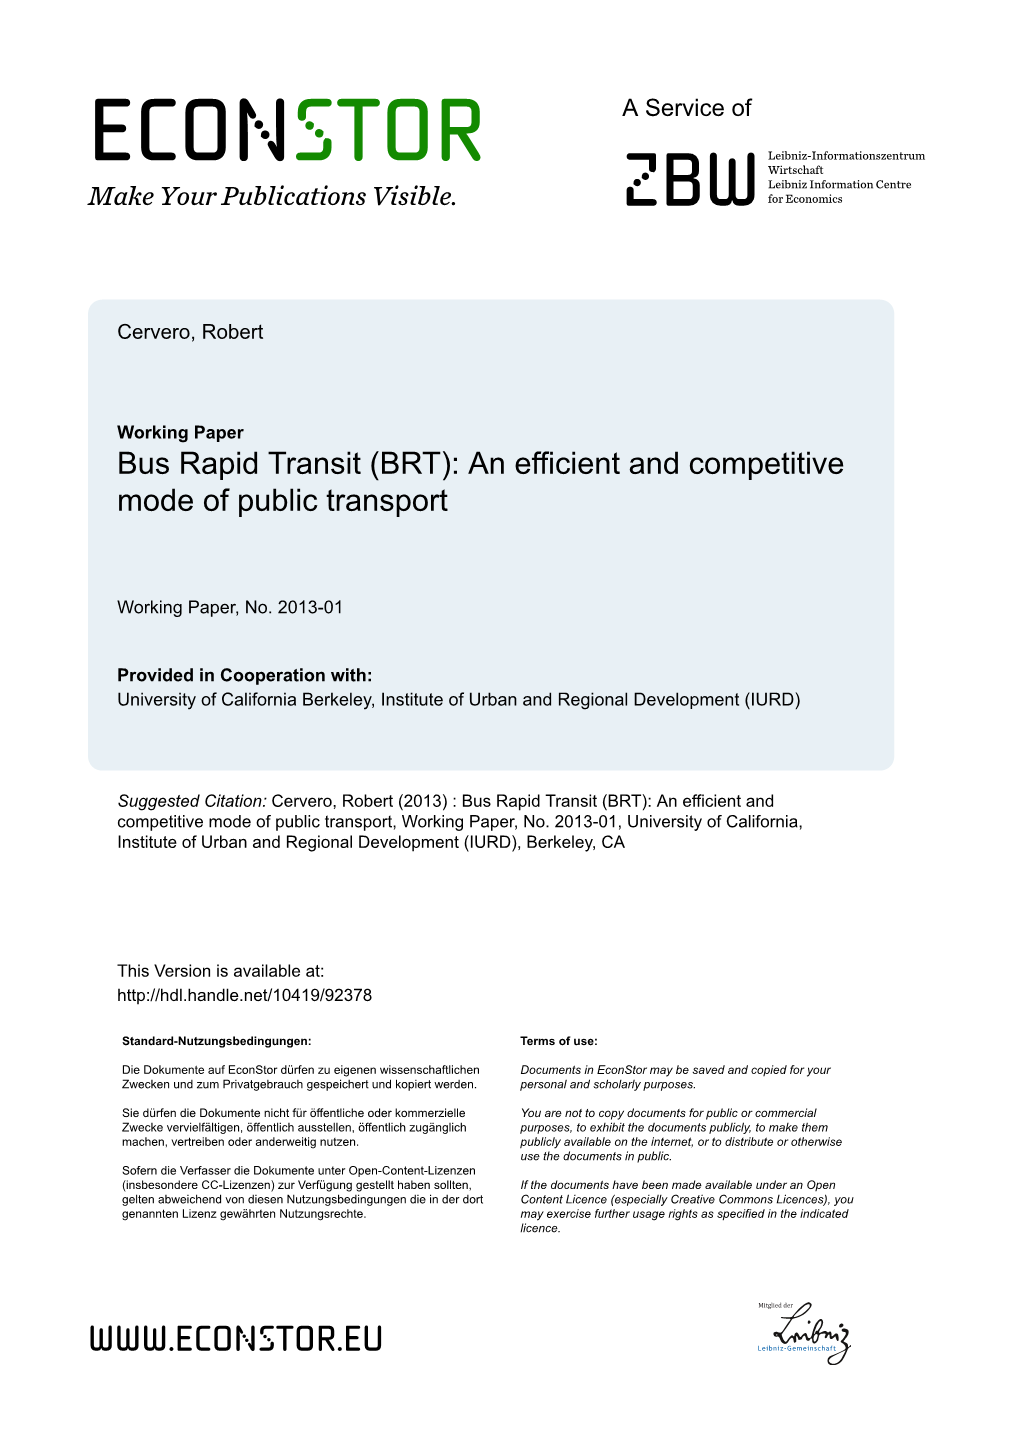 Bus Rapid Transit (BRT): an Efficient and Competitive Mode of Public Transport